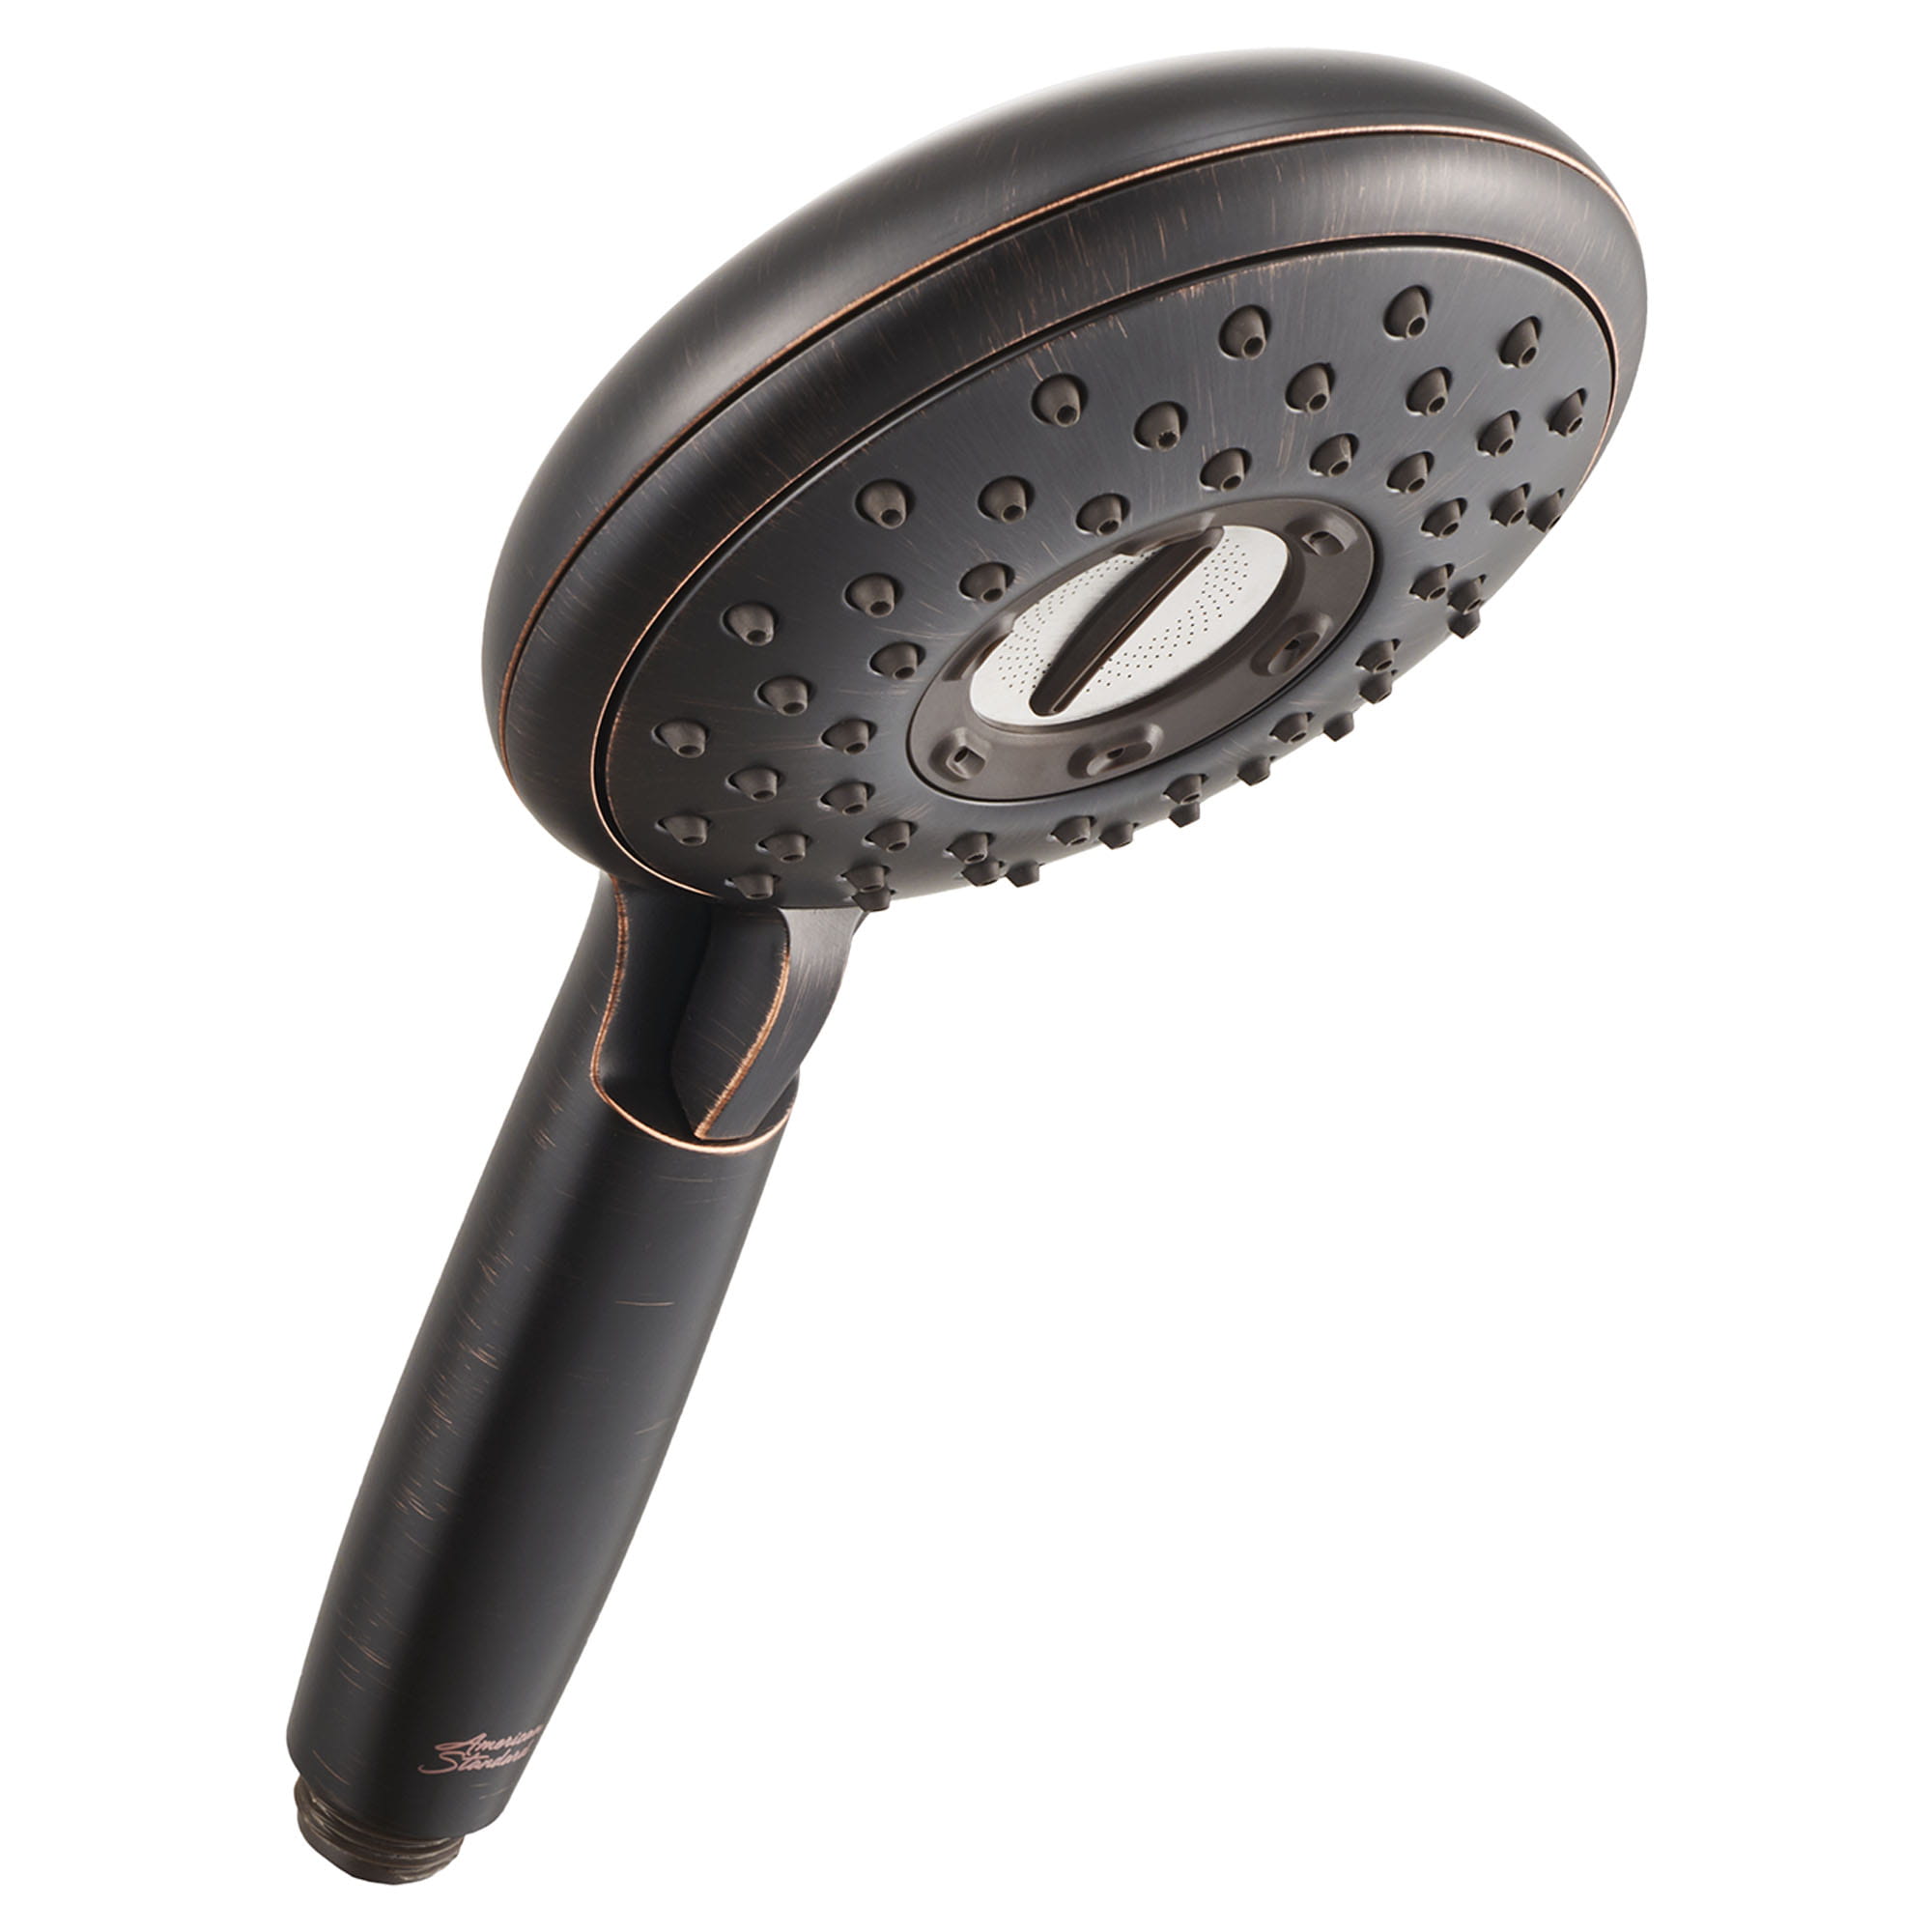 Spectra Handheld 25 gpm 95 L min 5 Inch 4 Function Hand Shower LEGACY BRONZE